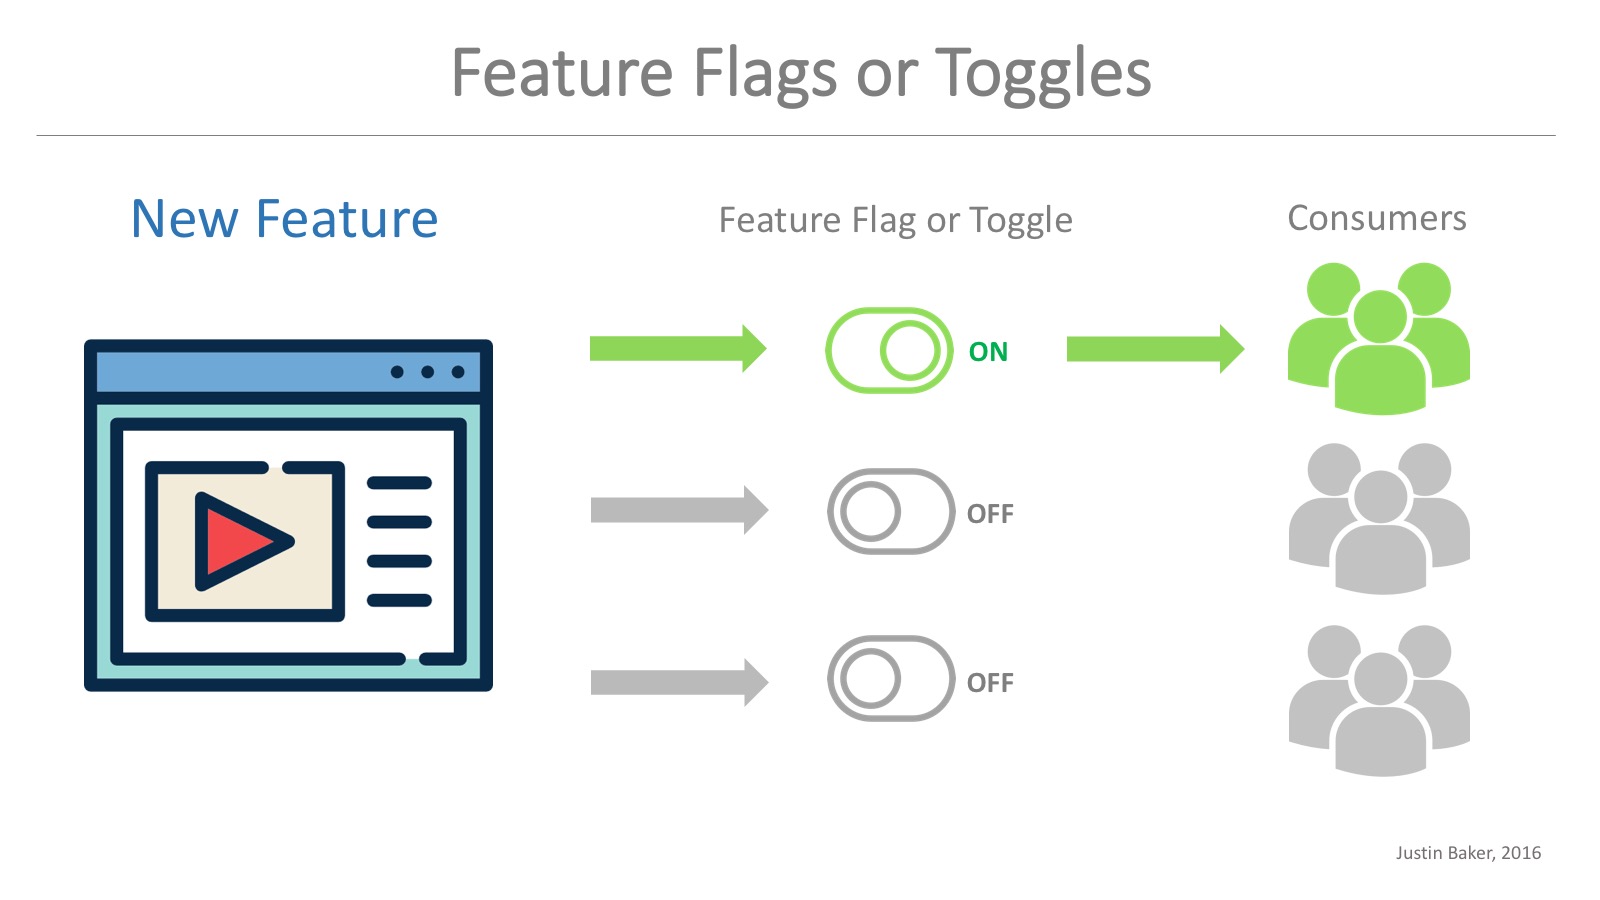 Nom : flags-or-toggles.jpg
Affichages : 9254
Taille : 108,4 Ko